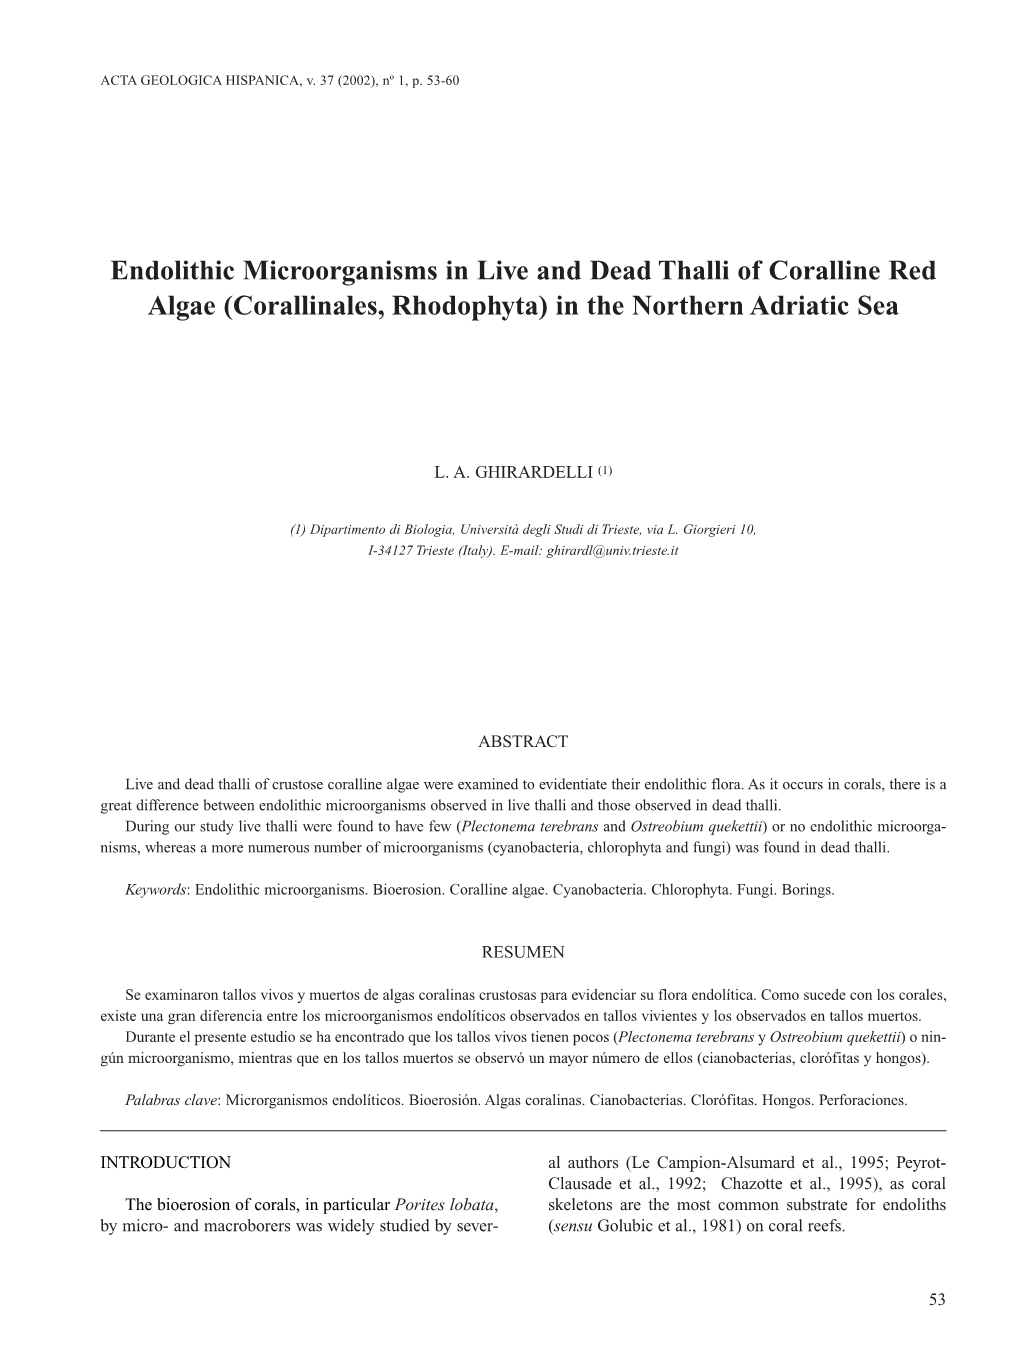 Endolithic Microorganisms in Live and Dead Thalli of Coralline Red Algae (Corallinales, Rhodophyta) in the Northern Adriatic Sea